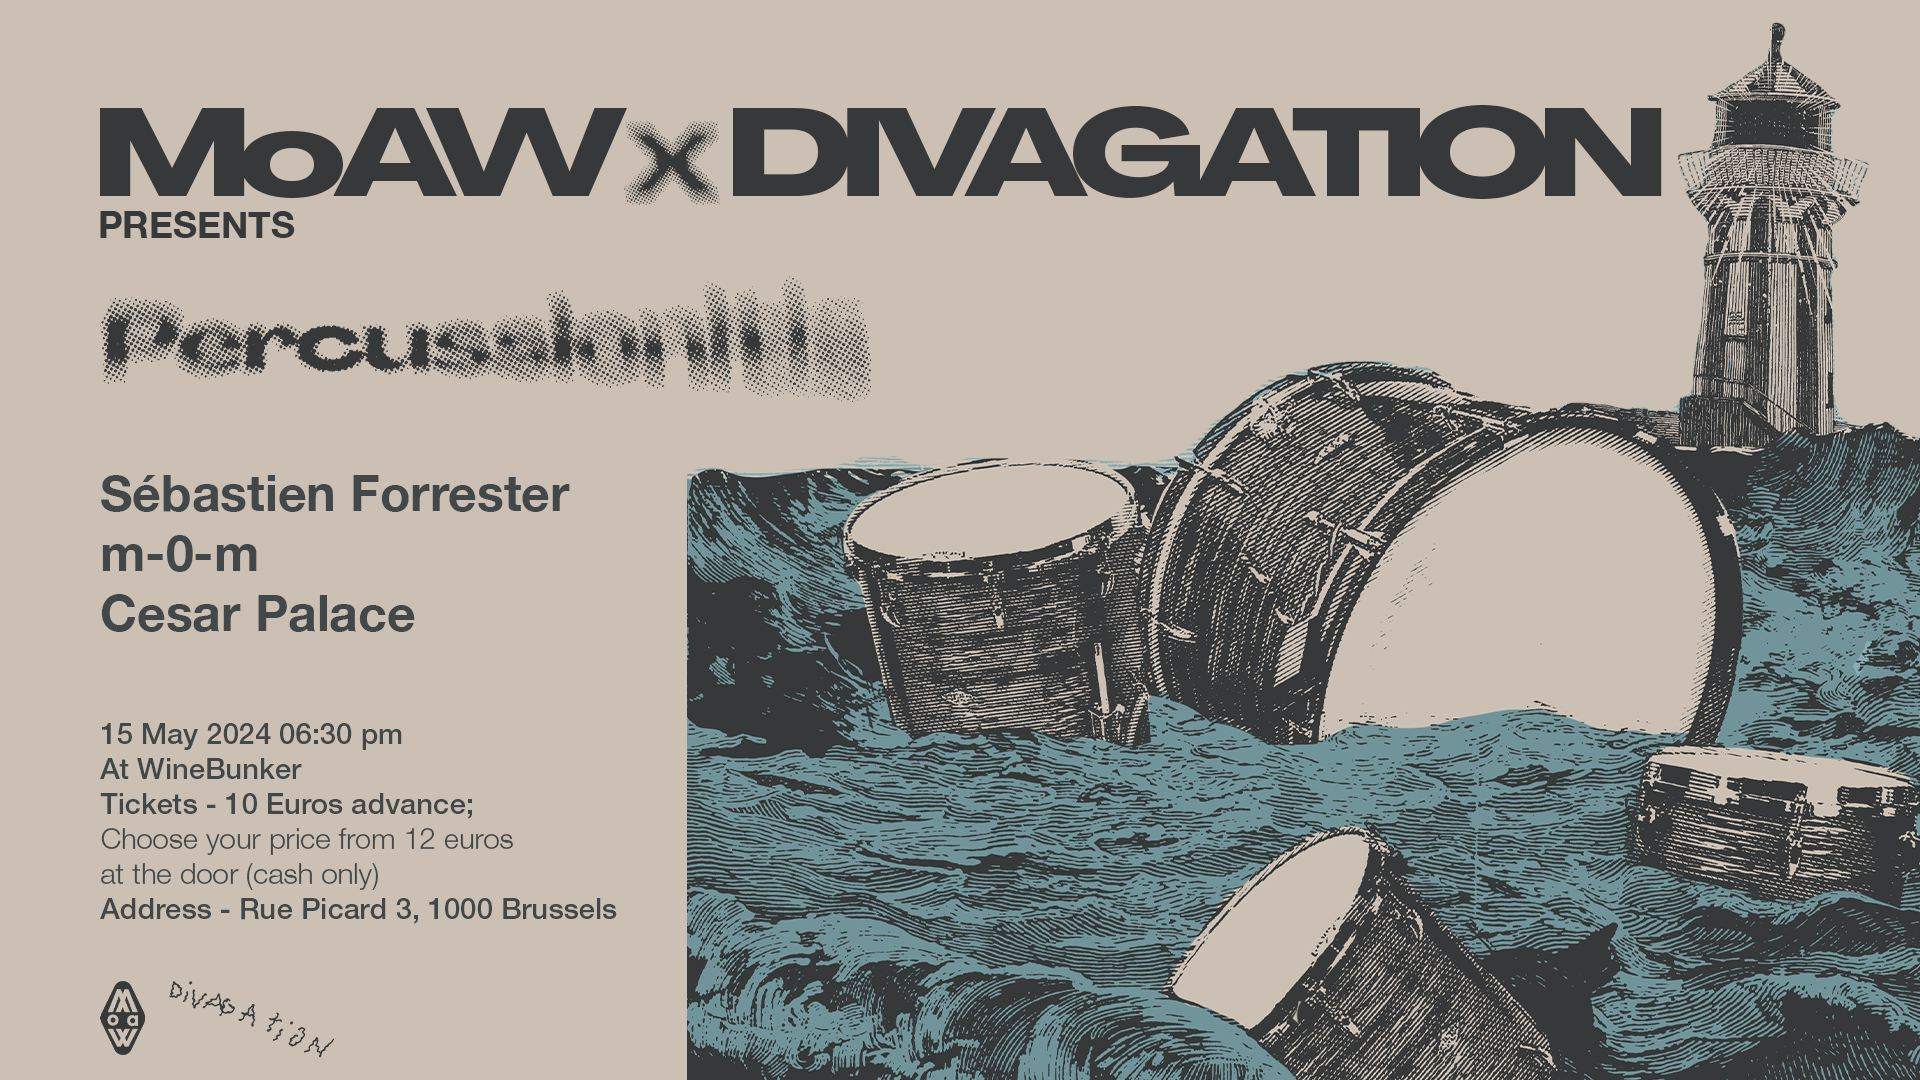 MoAW & DIVAGATION presents PERCUSSIONITIS - Flyer front